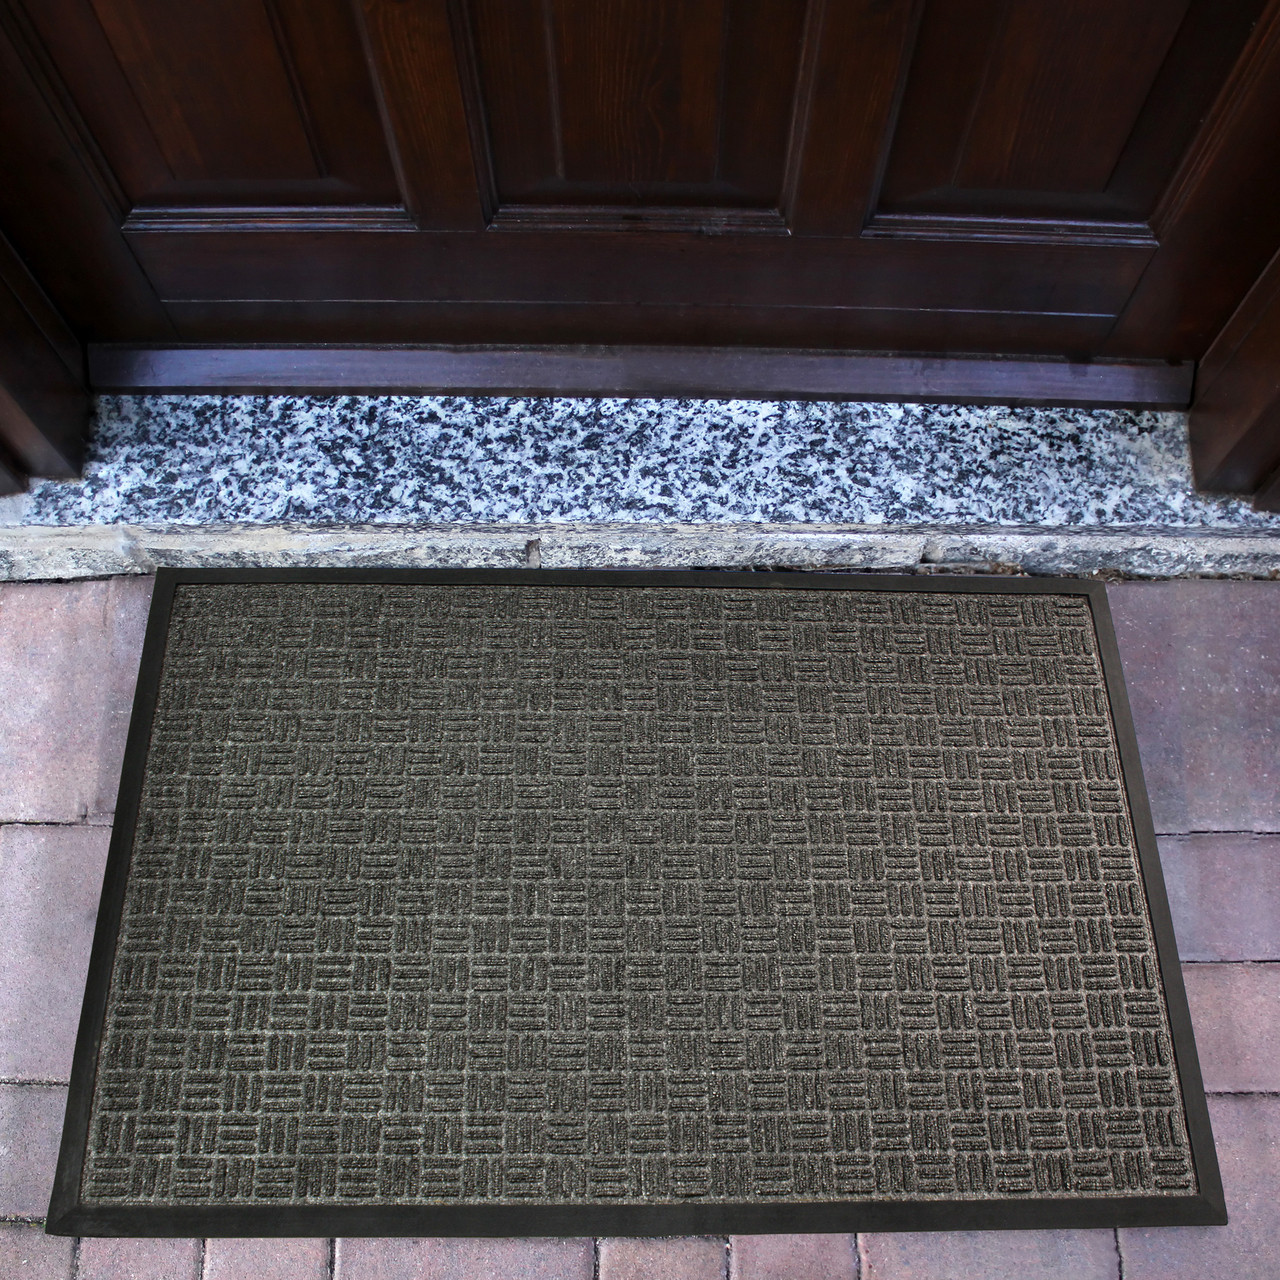 https://cdn11.bigcommerce.com/s-fjwps1jbkv/images/stencil/1280x1280/products/151/3559/ultralux-premium-indoor-outdoor-entrance-mat-or-absorbent-strong-anti-slip-entry-rug-heavy-duty-doormat-or-dark-gray__60263.1688992837.jpg?c=2?imbypass=on